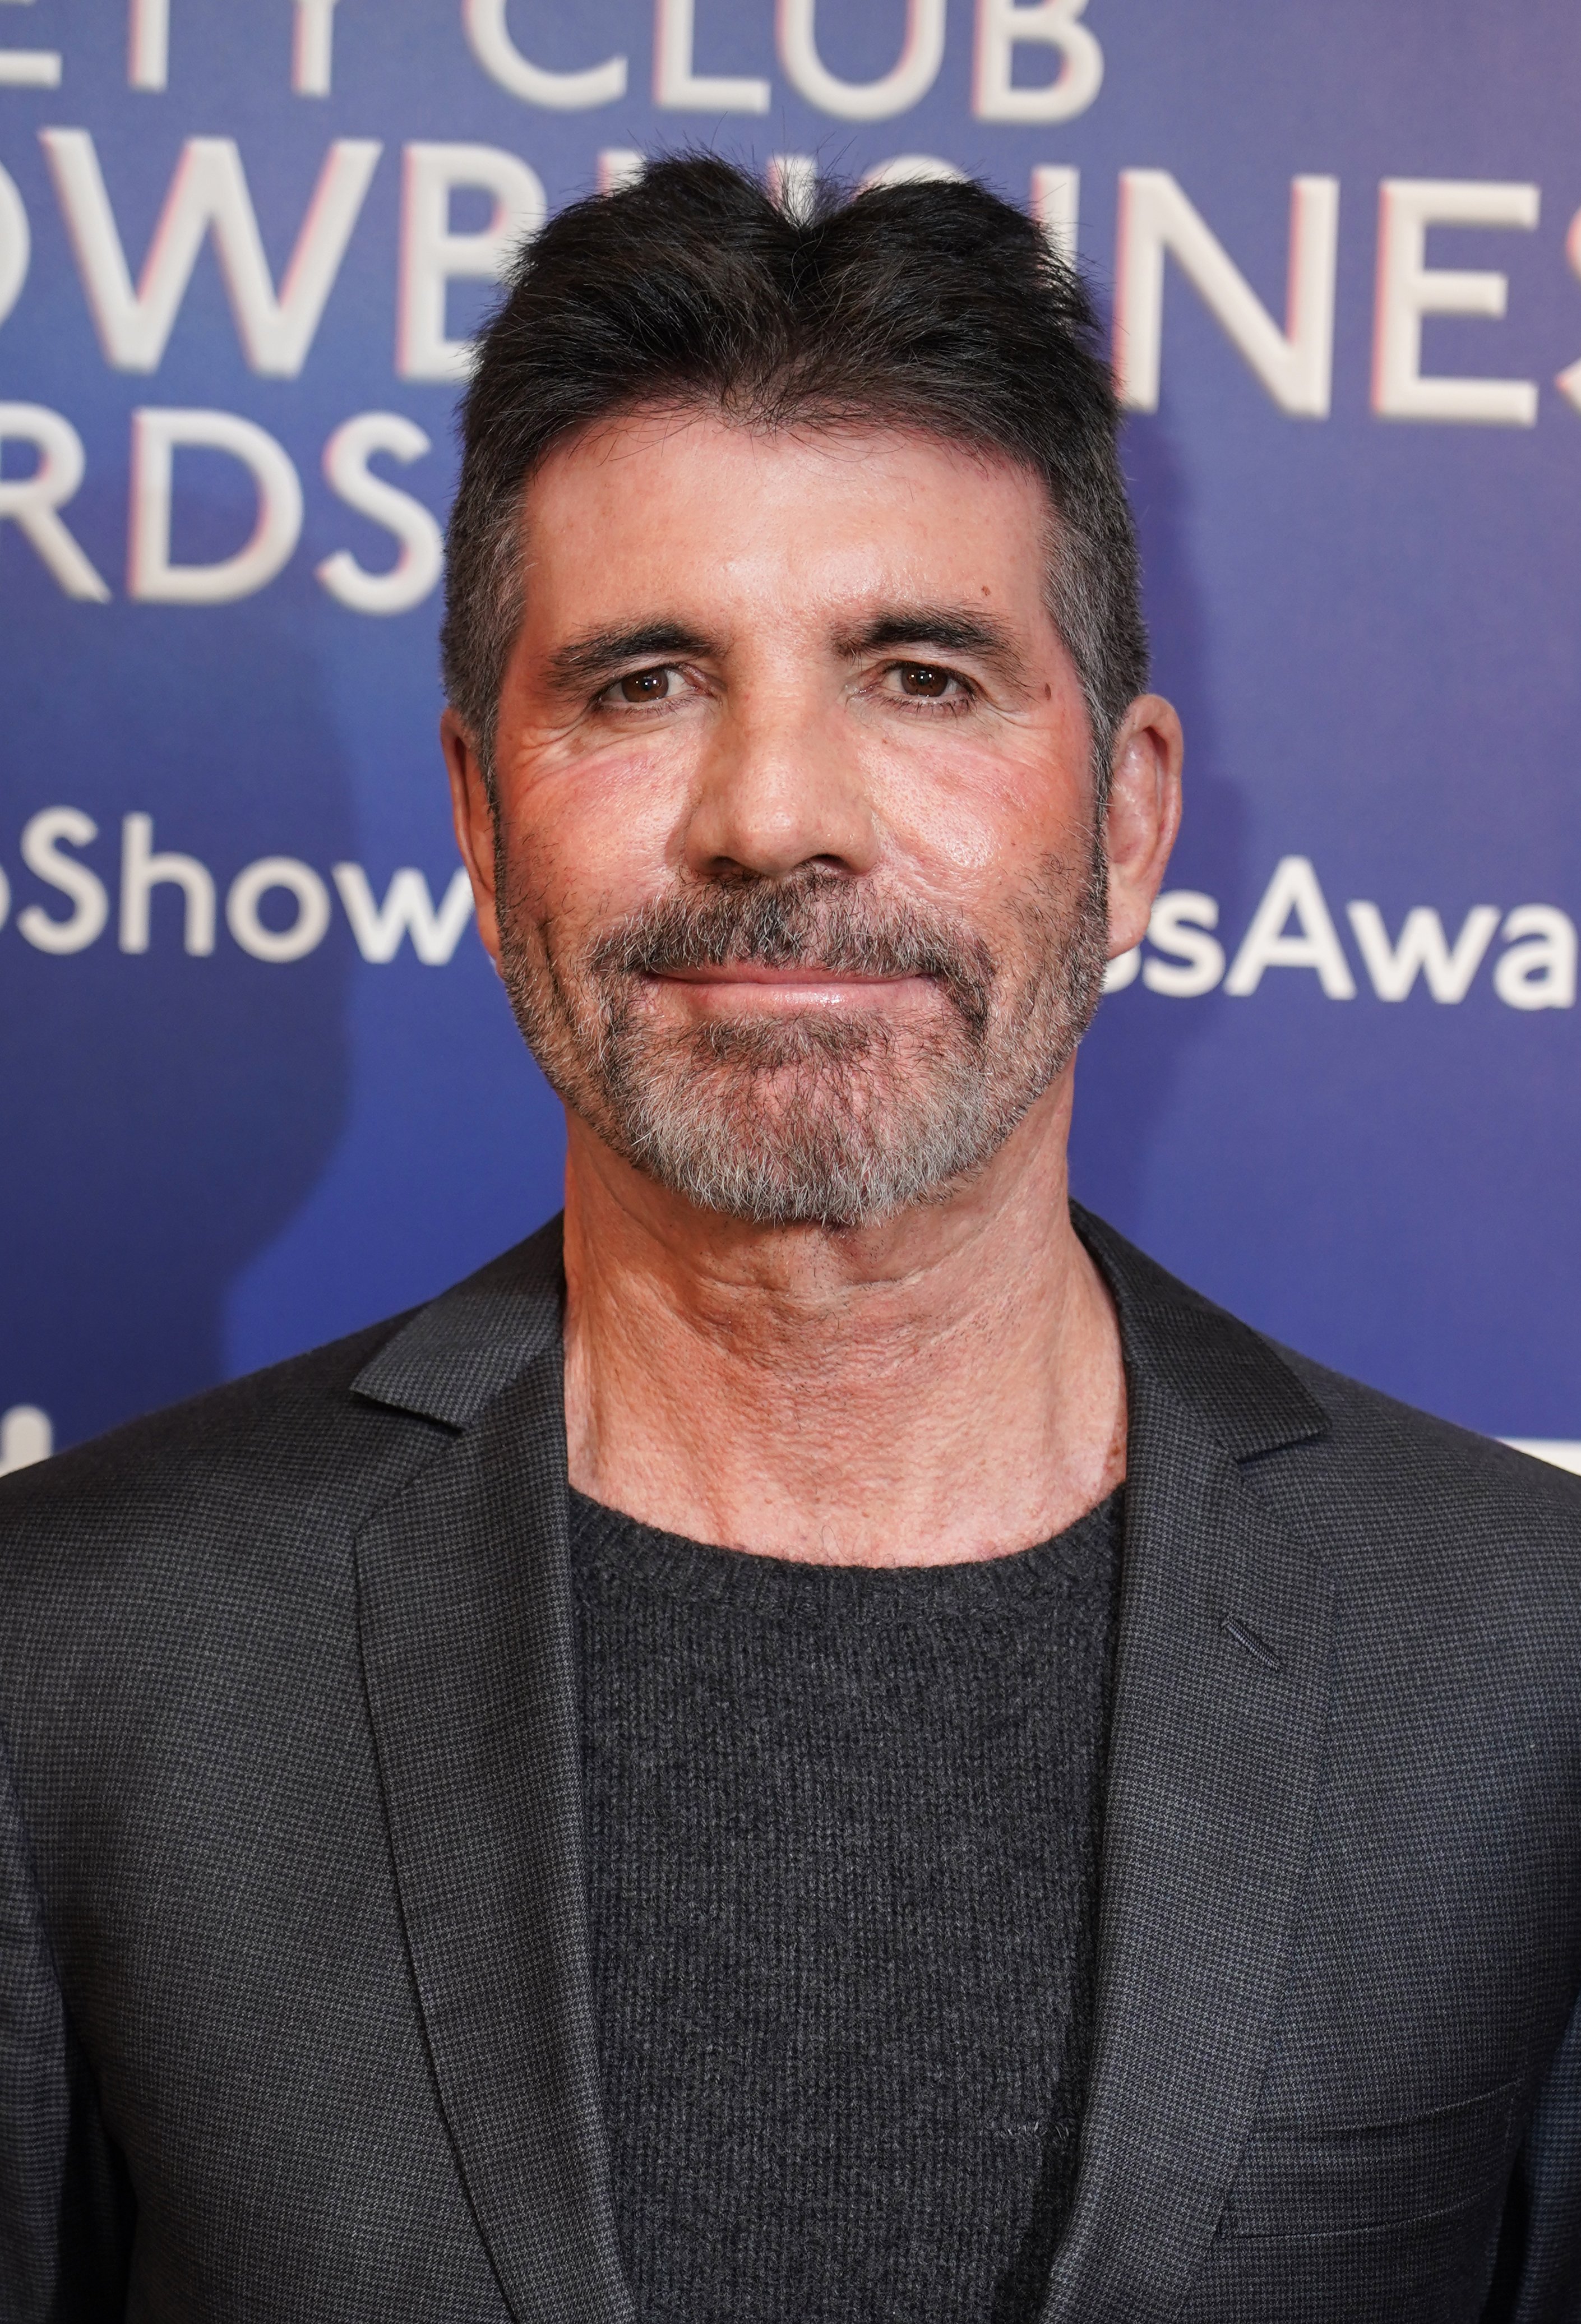 Simon Cowell attends the Variety Club Showbusiness Awards at the London Hilton on November 21, 2022, in London. | Source: Getty Images